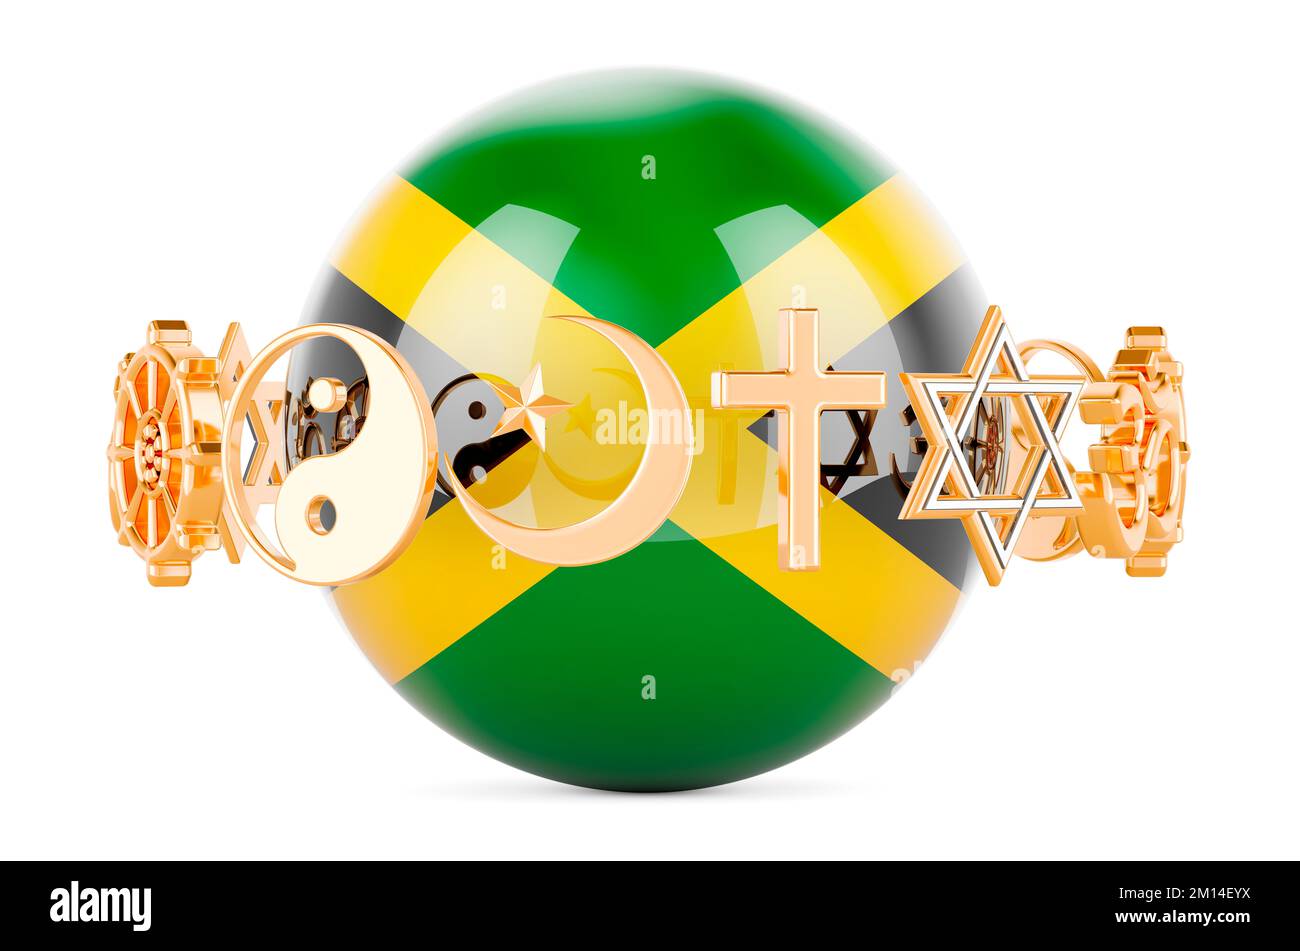 Jamaican flag painted on sphere with religions symbols around, 3D rendering isolated on white background Stock Photo